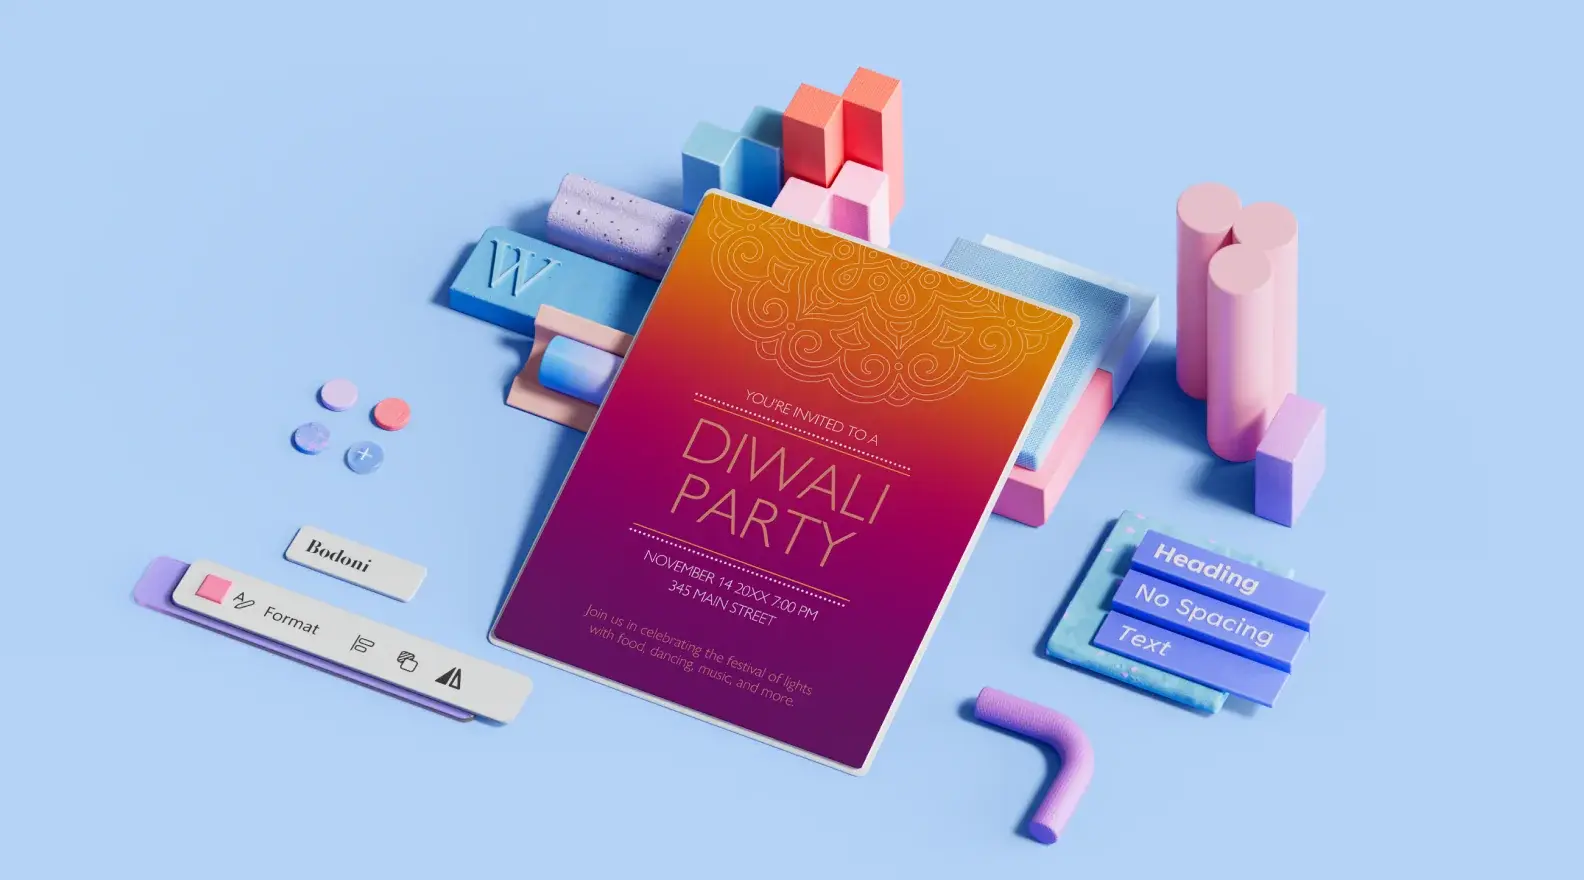 Diwali party event flyer template surrounded by 3D design elements